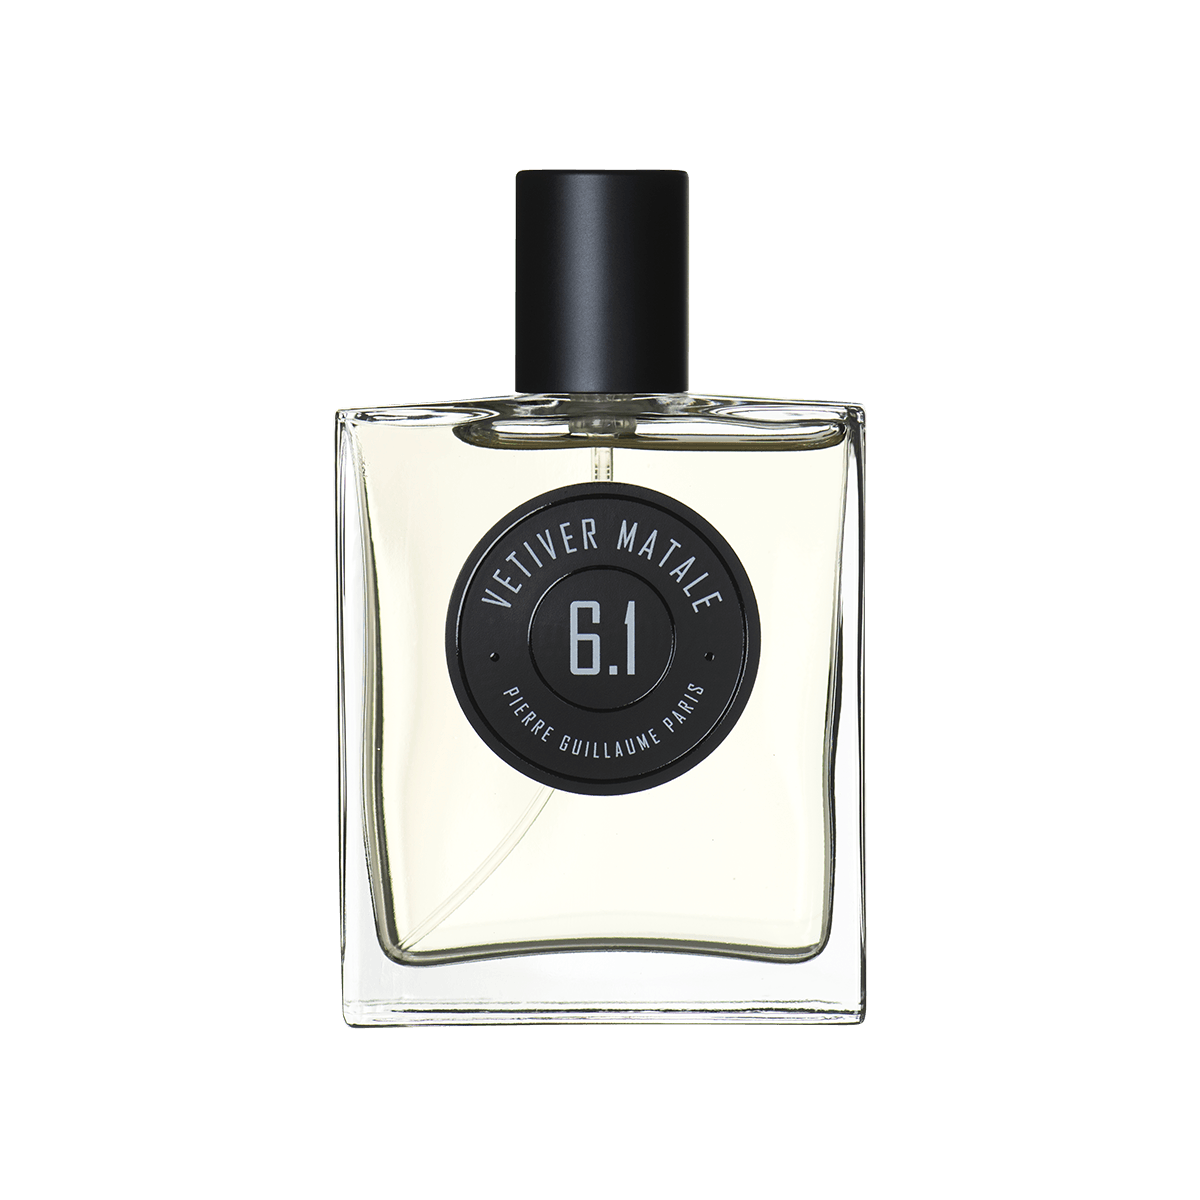 Image of 6.1 Vetiver Matale 50 ml by the perfume brand Pierre Guillaume